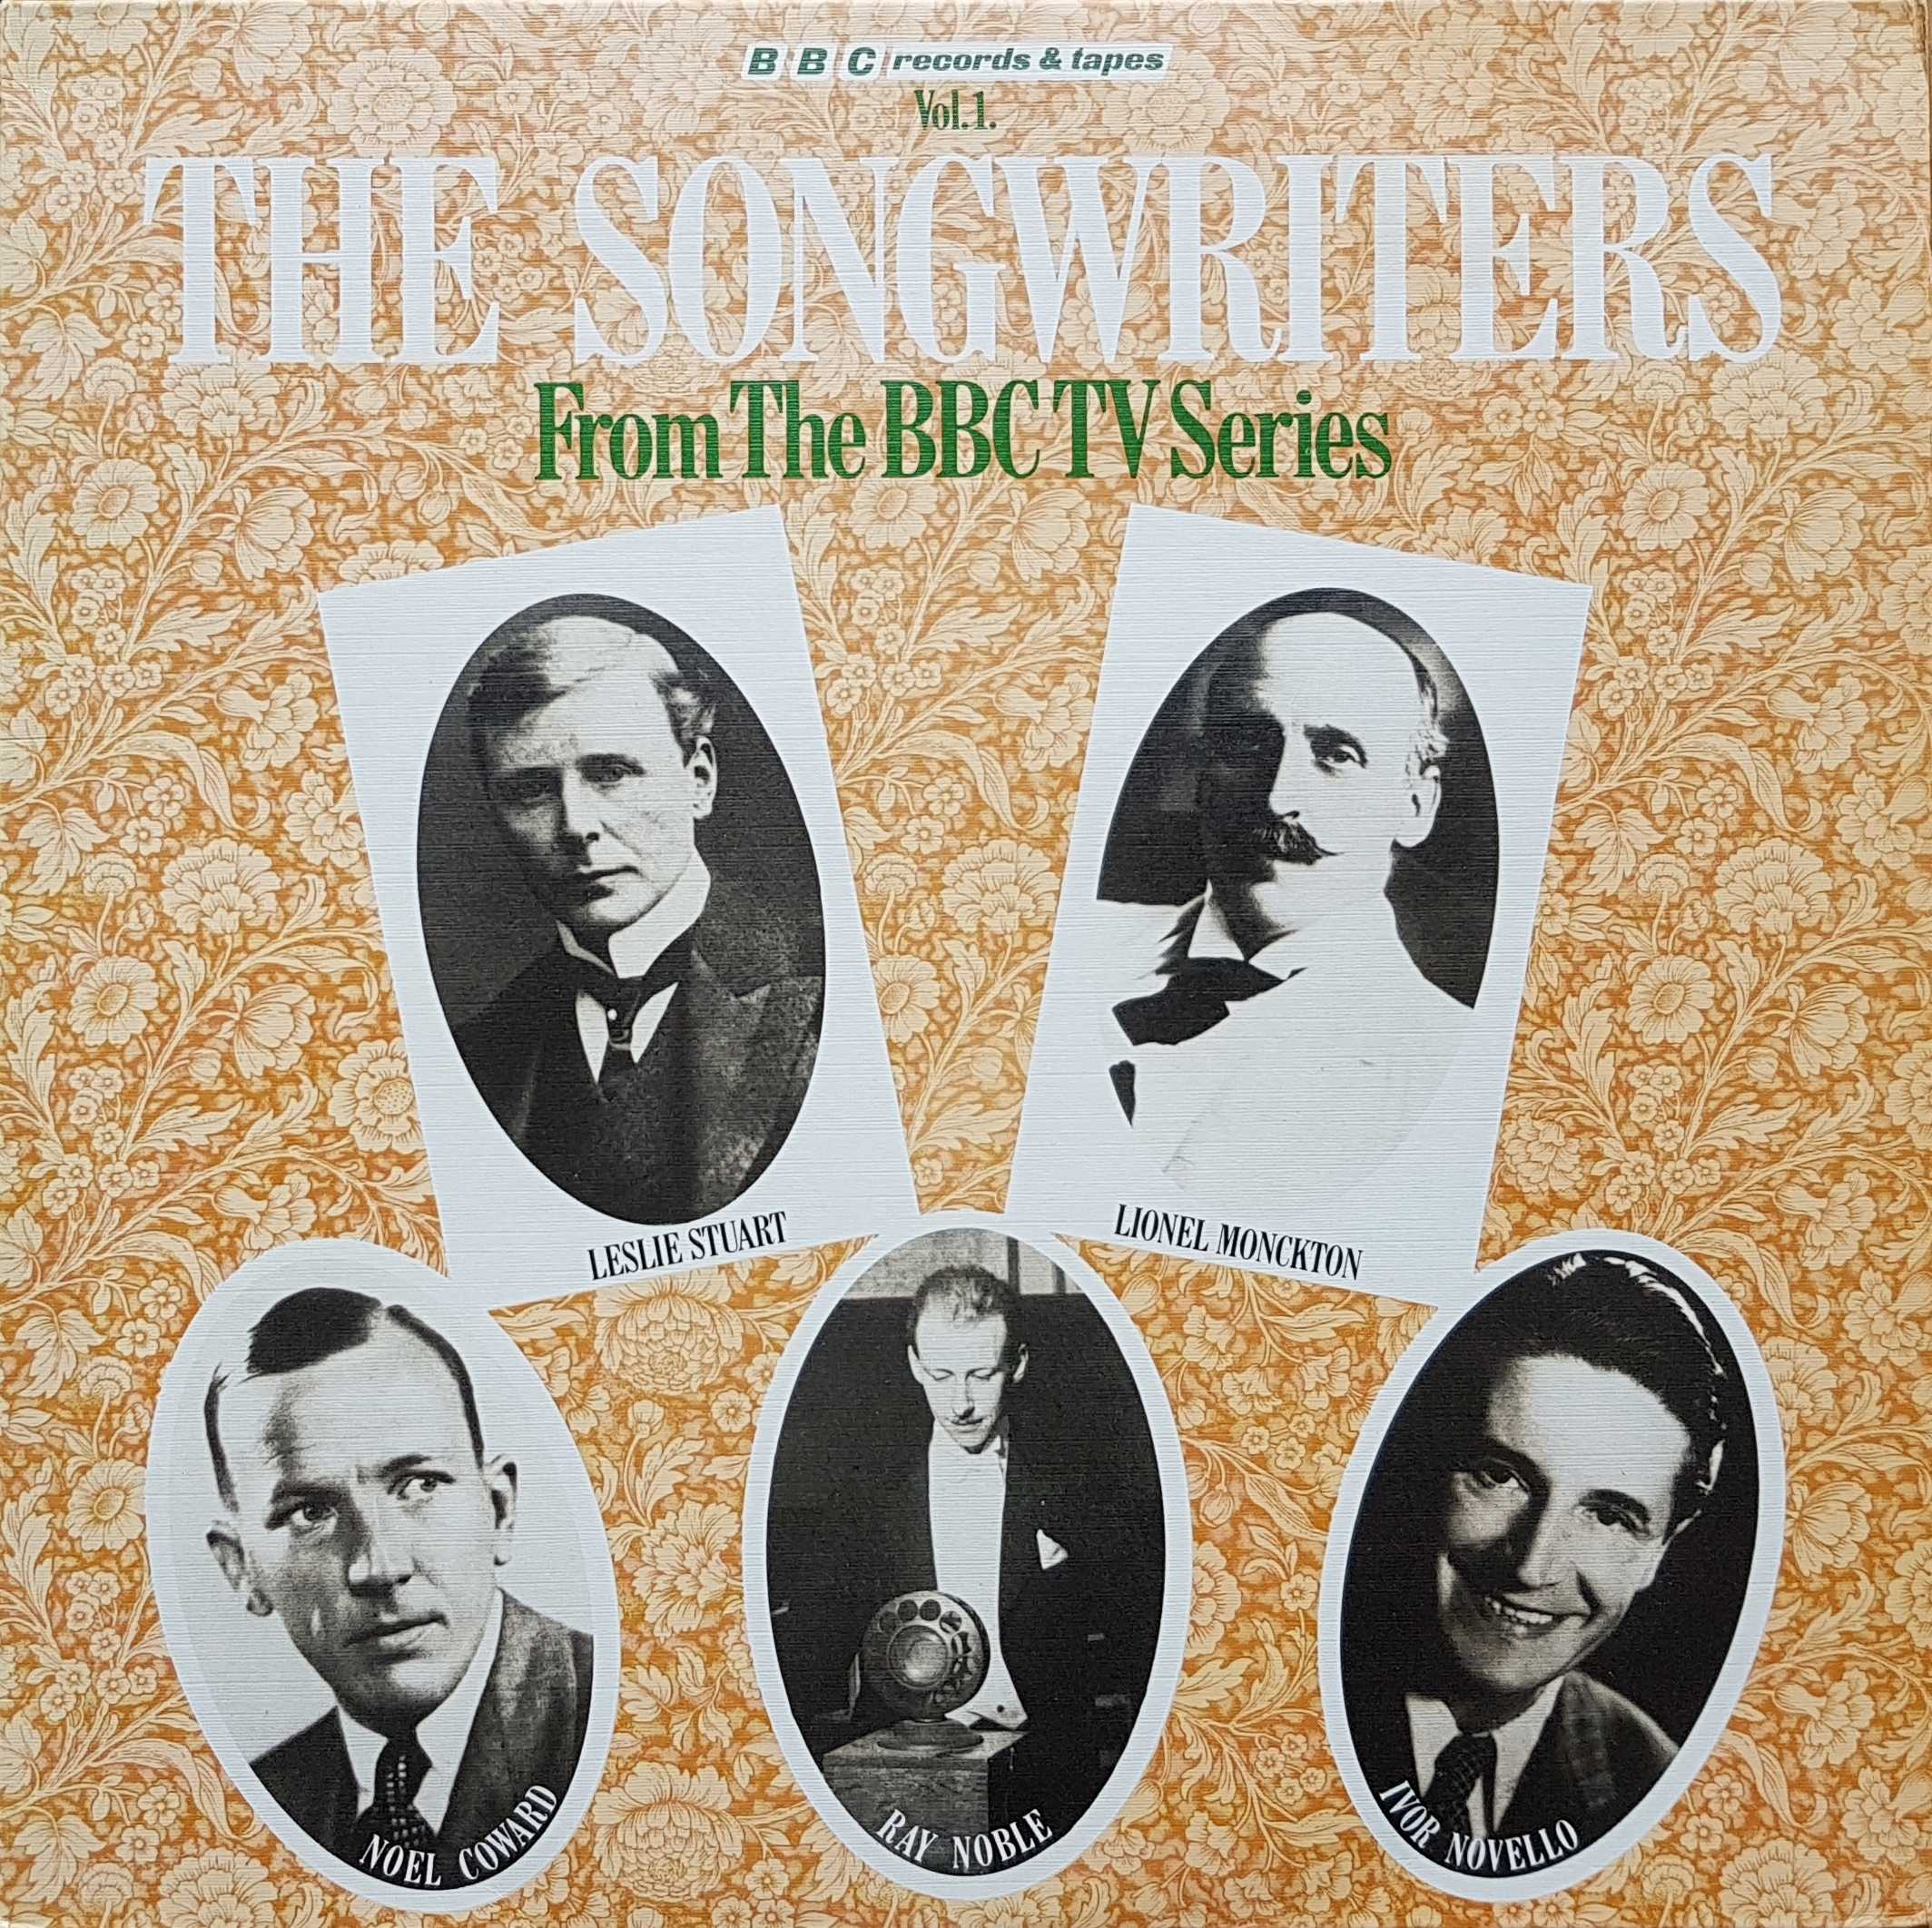 Picture of REB 325 The Songwriters by artist Various from the BBC albums - Records and Tapes library